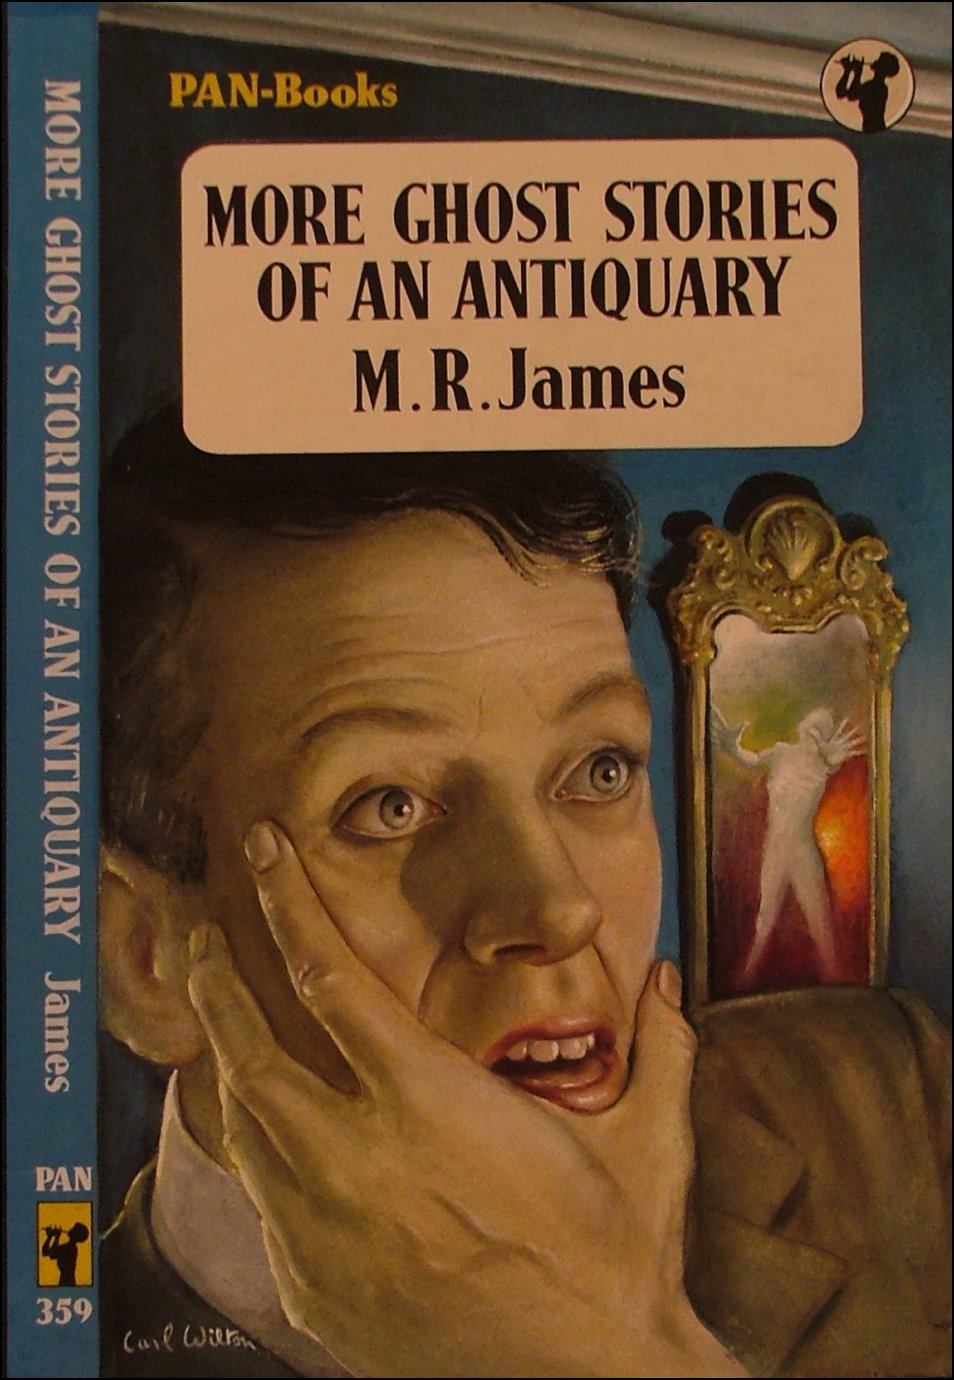 MOre Ghost Stories of an Antiquary